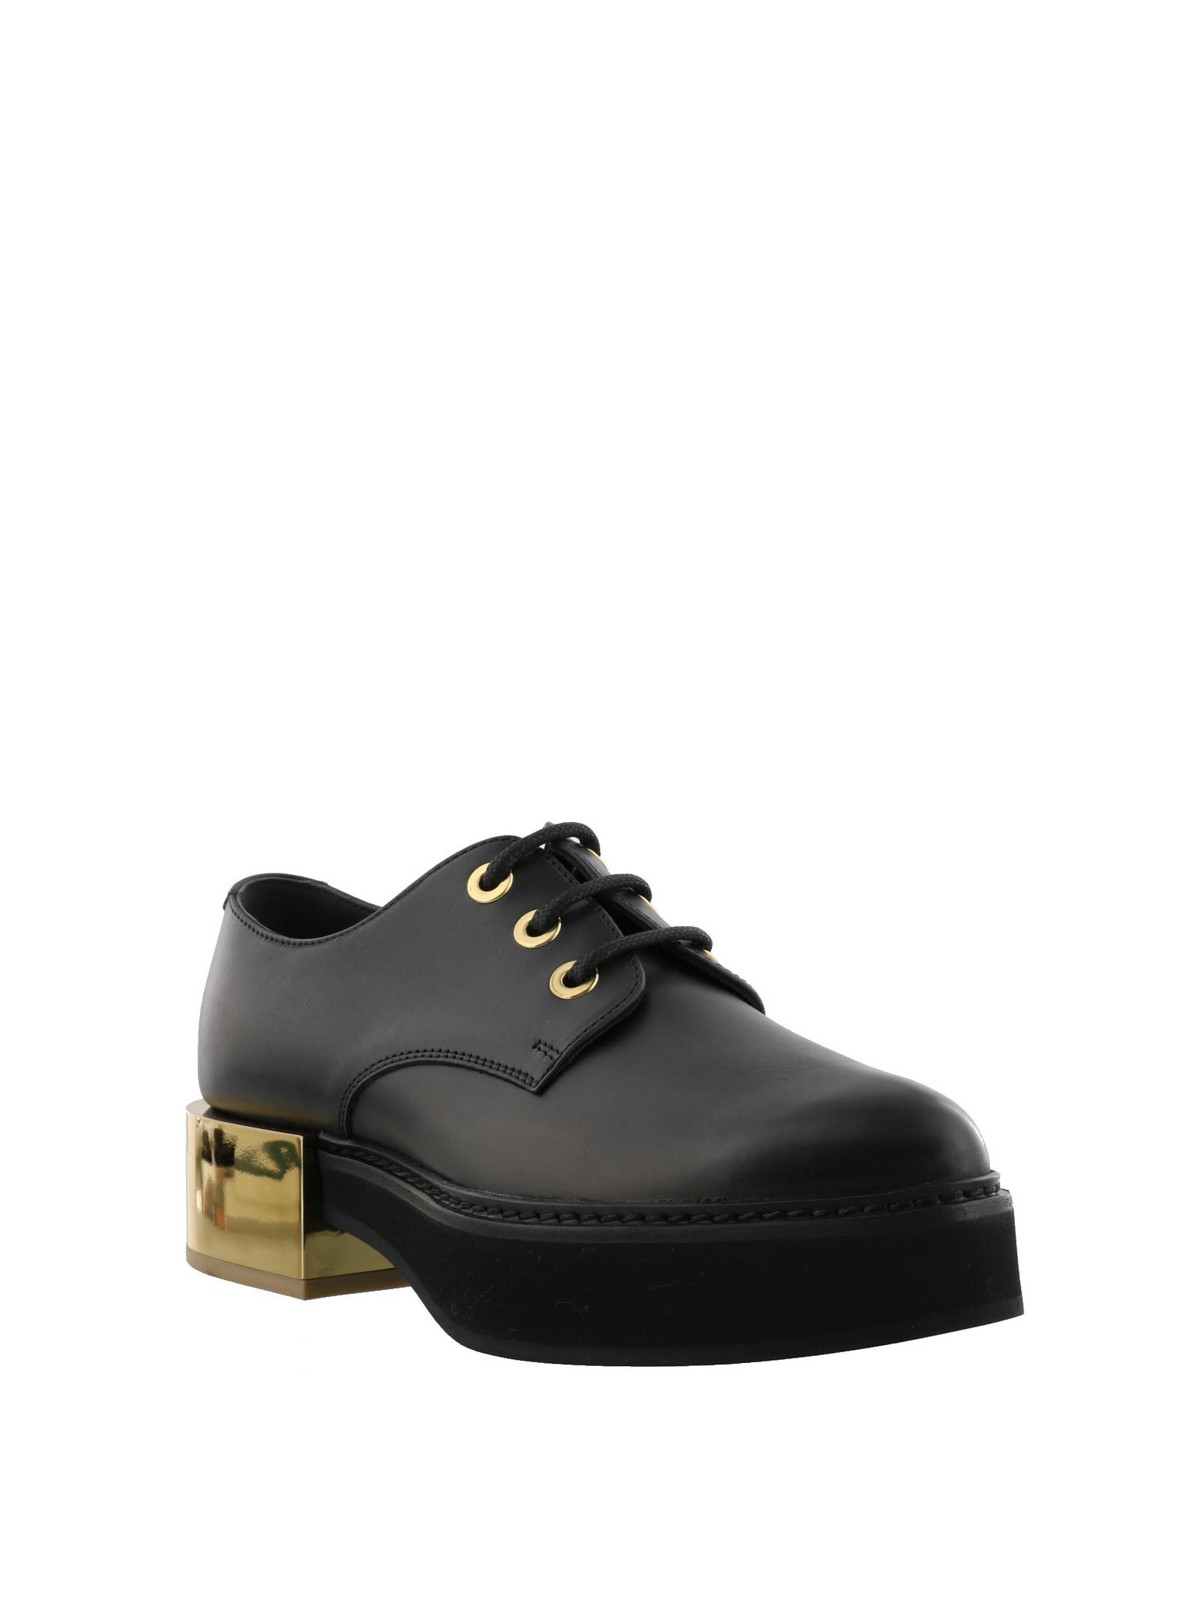 Lace-ups shoes Alexander Mcqueen - Gold-tone leather creepers - 509035WHR5I1088